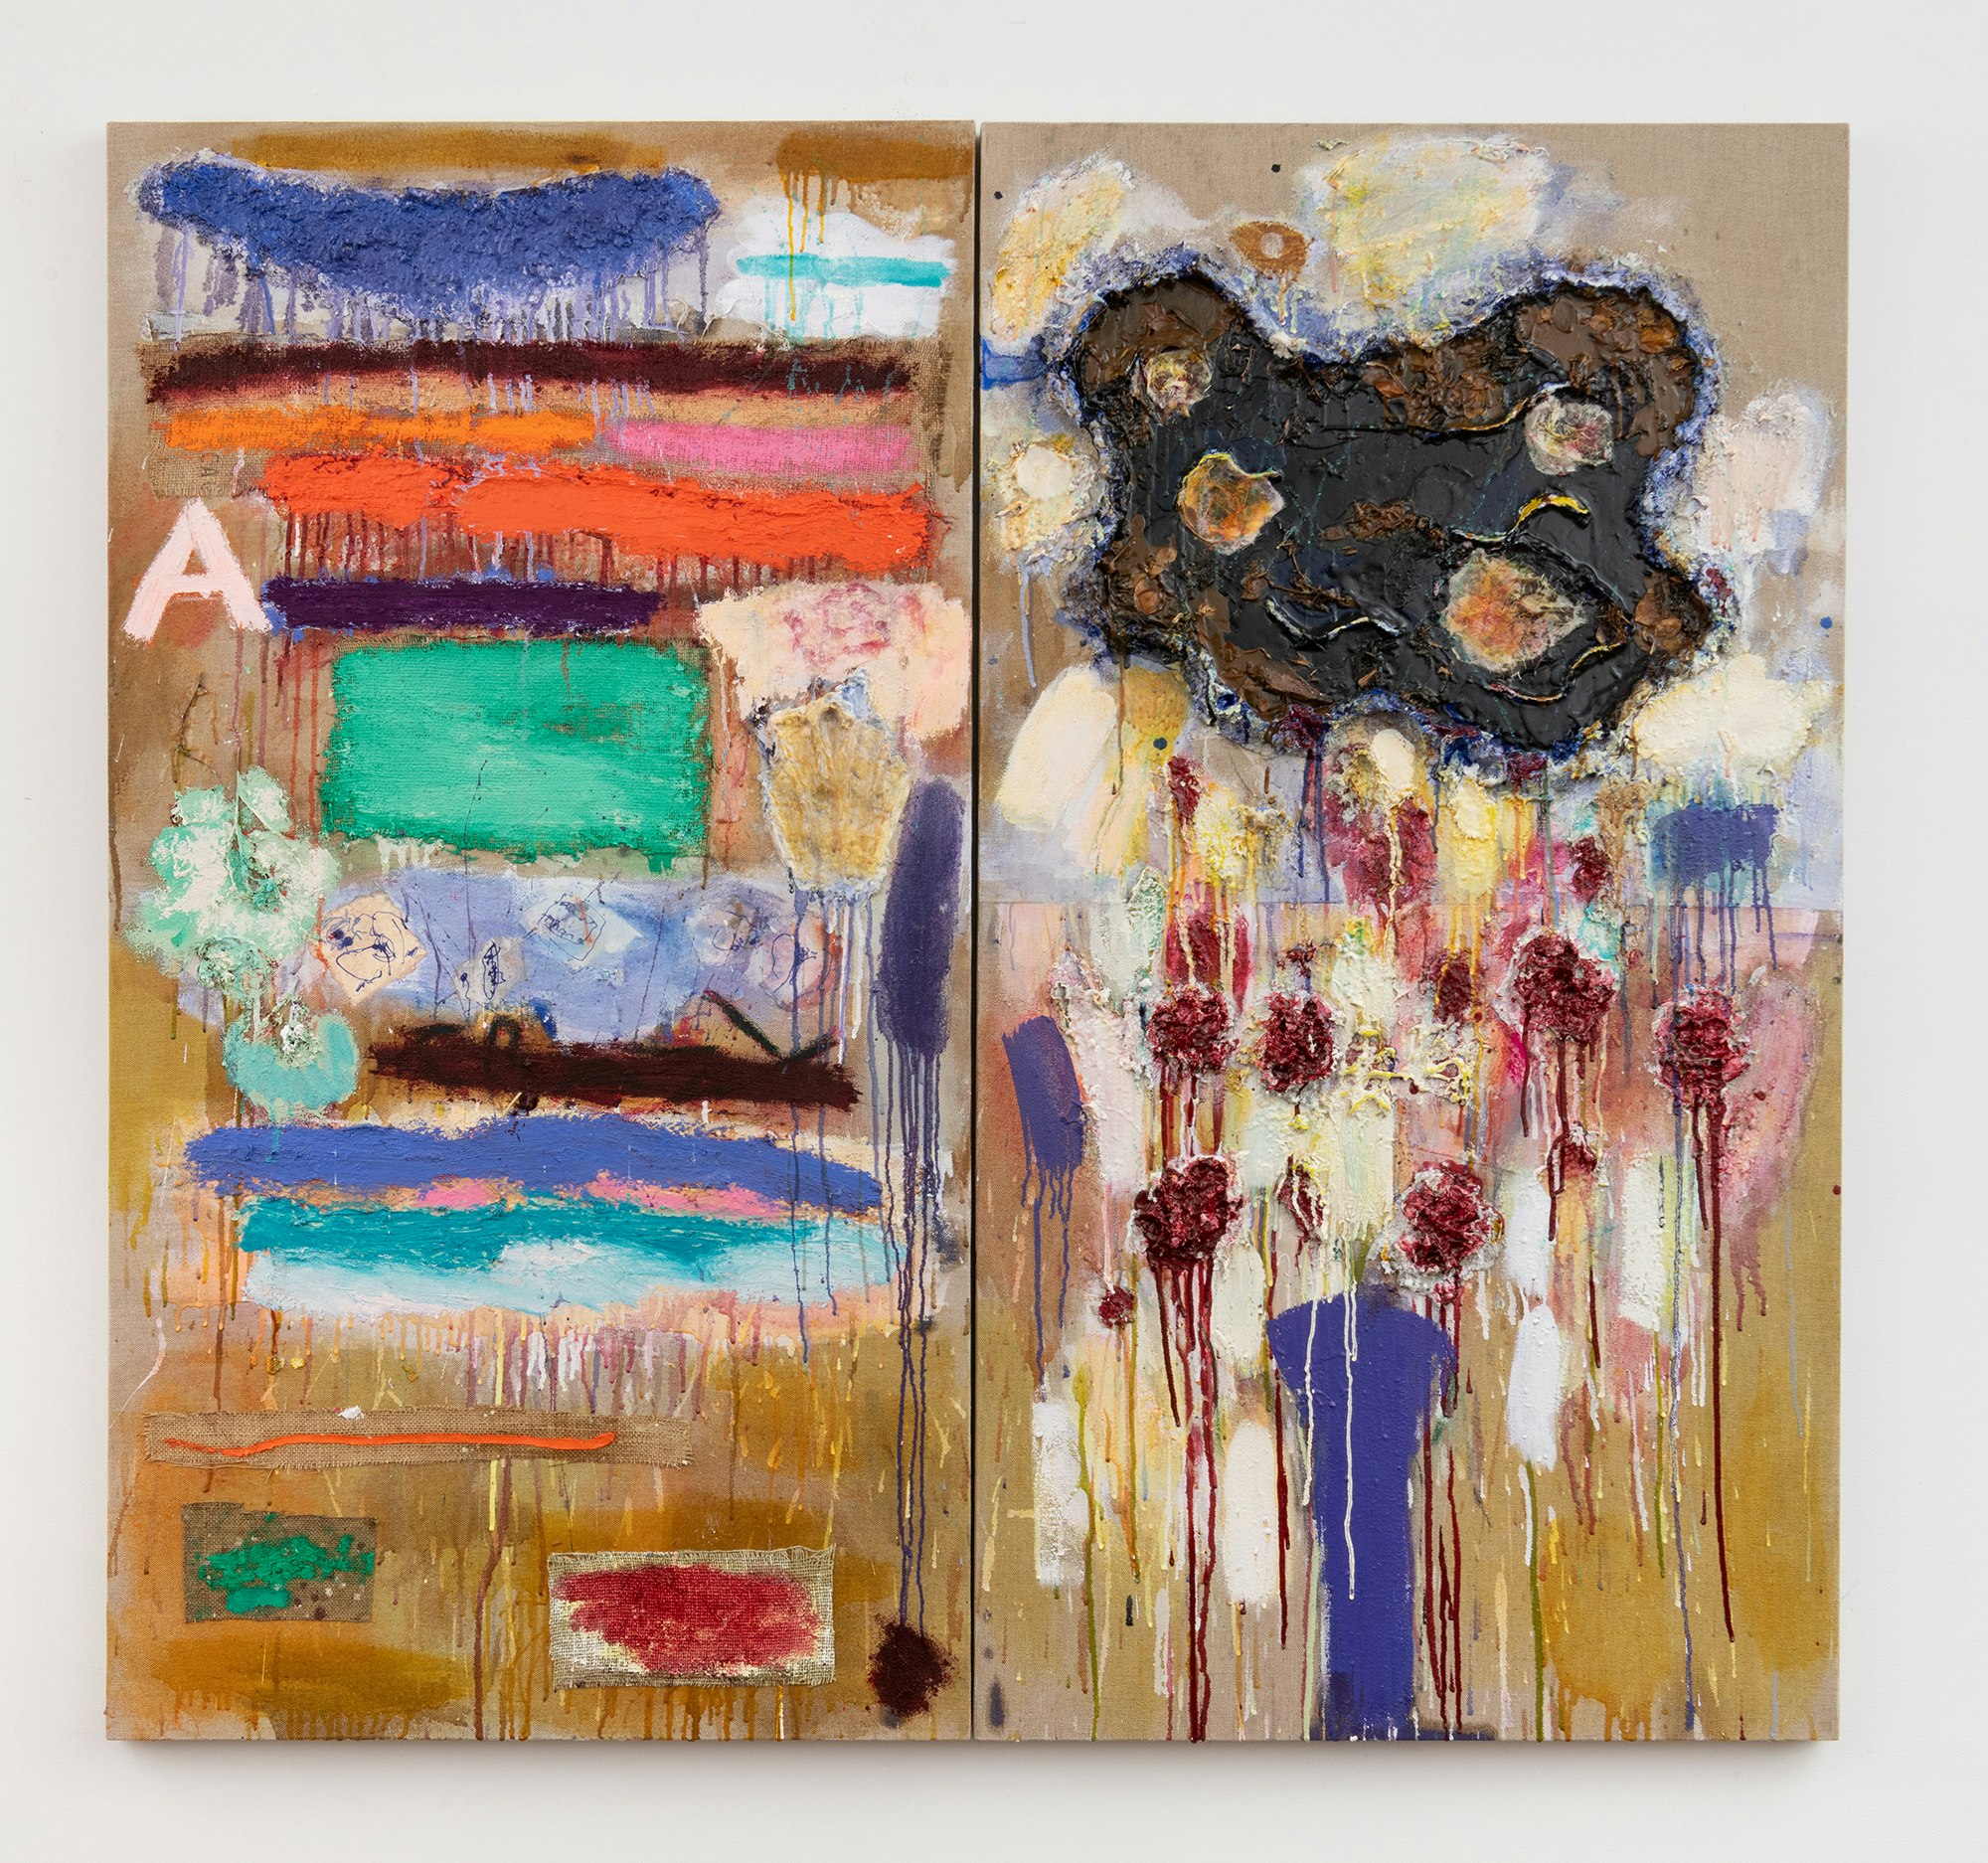 Joan Snyder, <em>Duet in Three Parts</em>, 2021. Oil, acrylic, ink, paper mache, burlap, paper, twigs, leaves on linen in two parts, overall: 60 x 64 inches. Courtesy Franklin Parrasch Gallery.